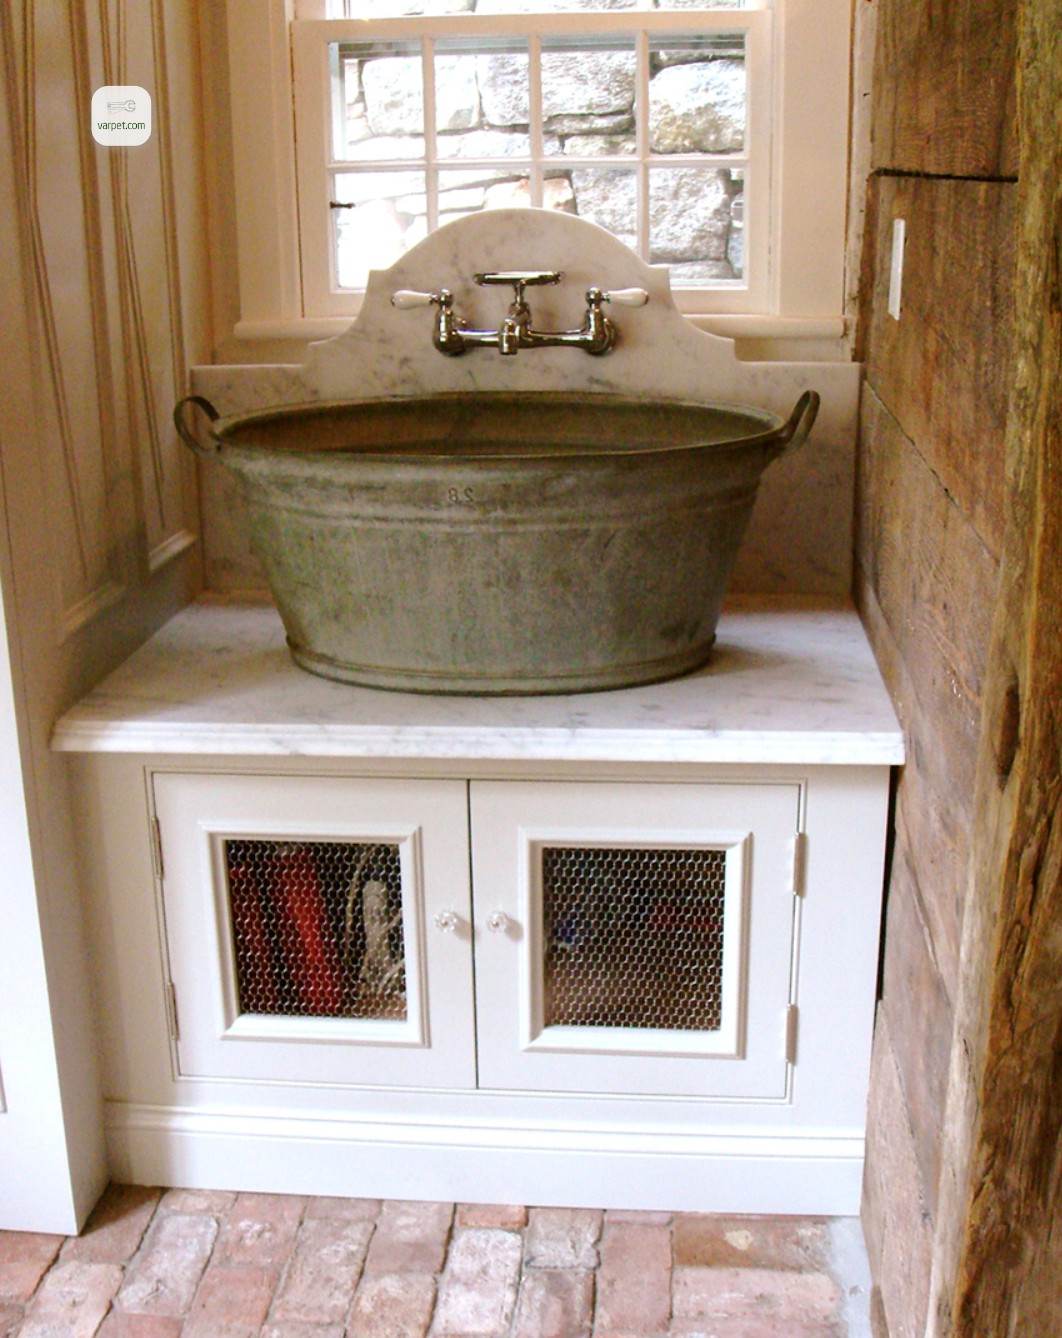 The summerhouse sink from improvised materials